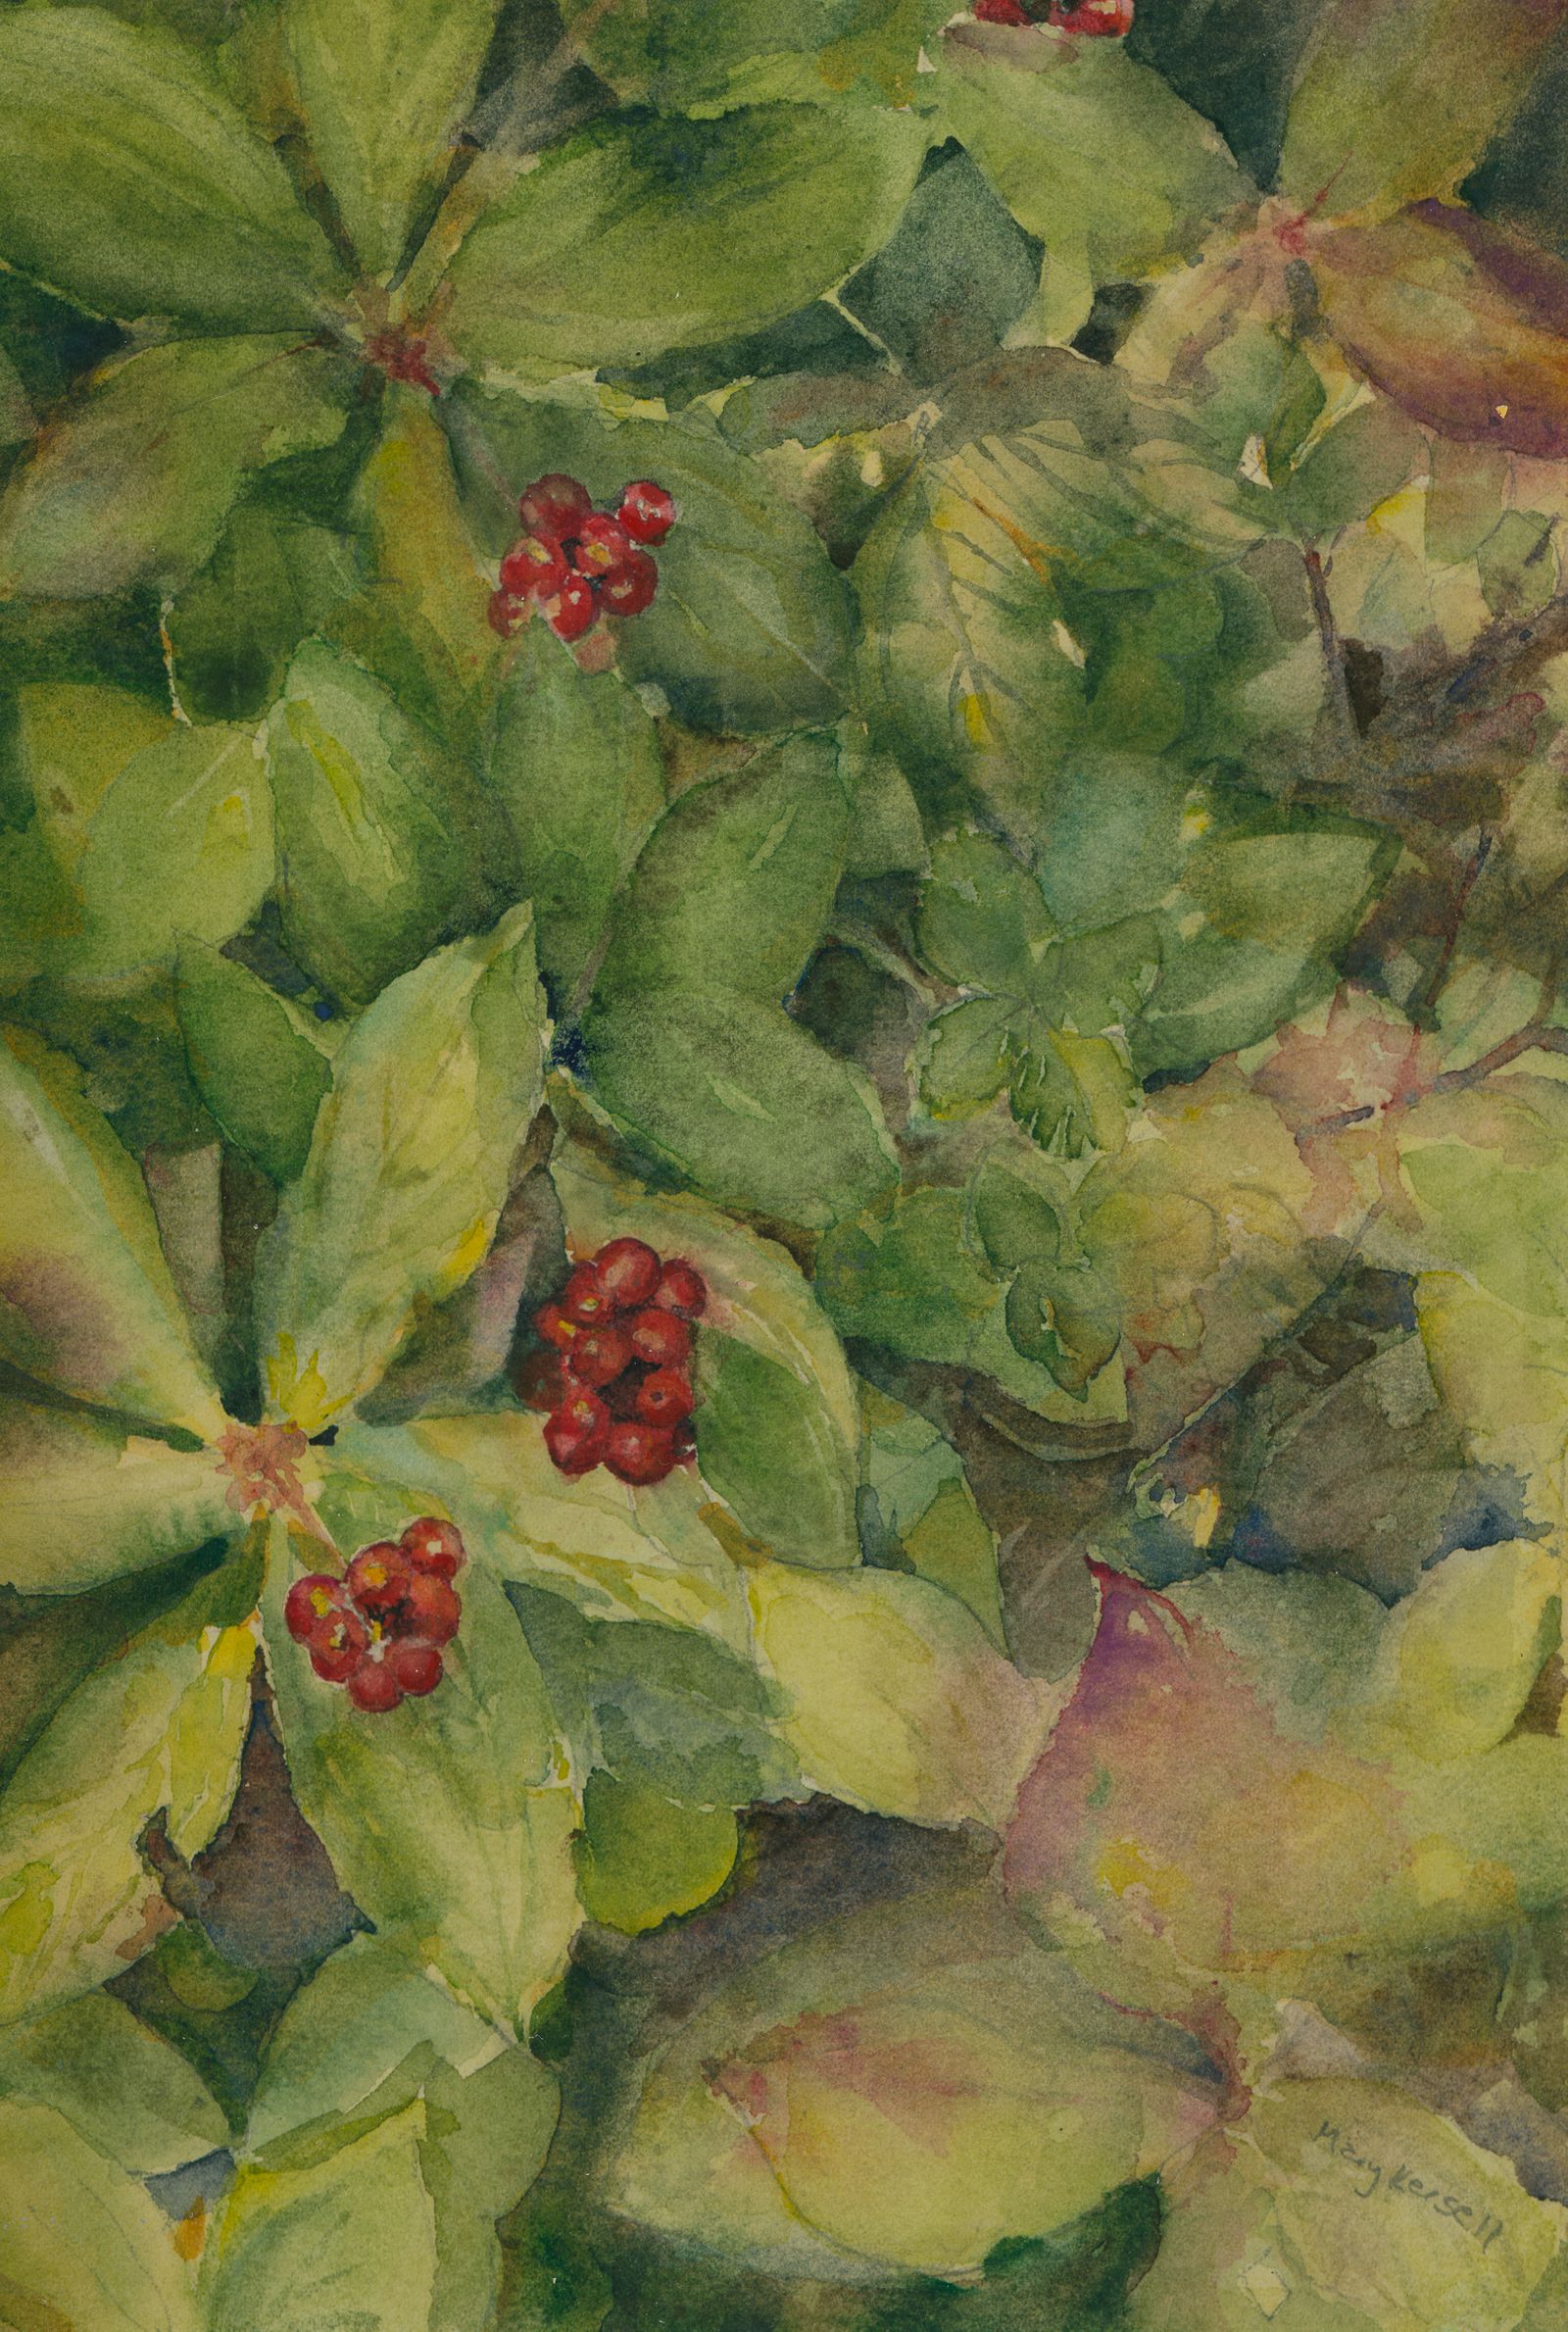 A watercolor of a closeup view of Bunchberry on the forest floor.